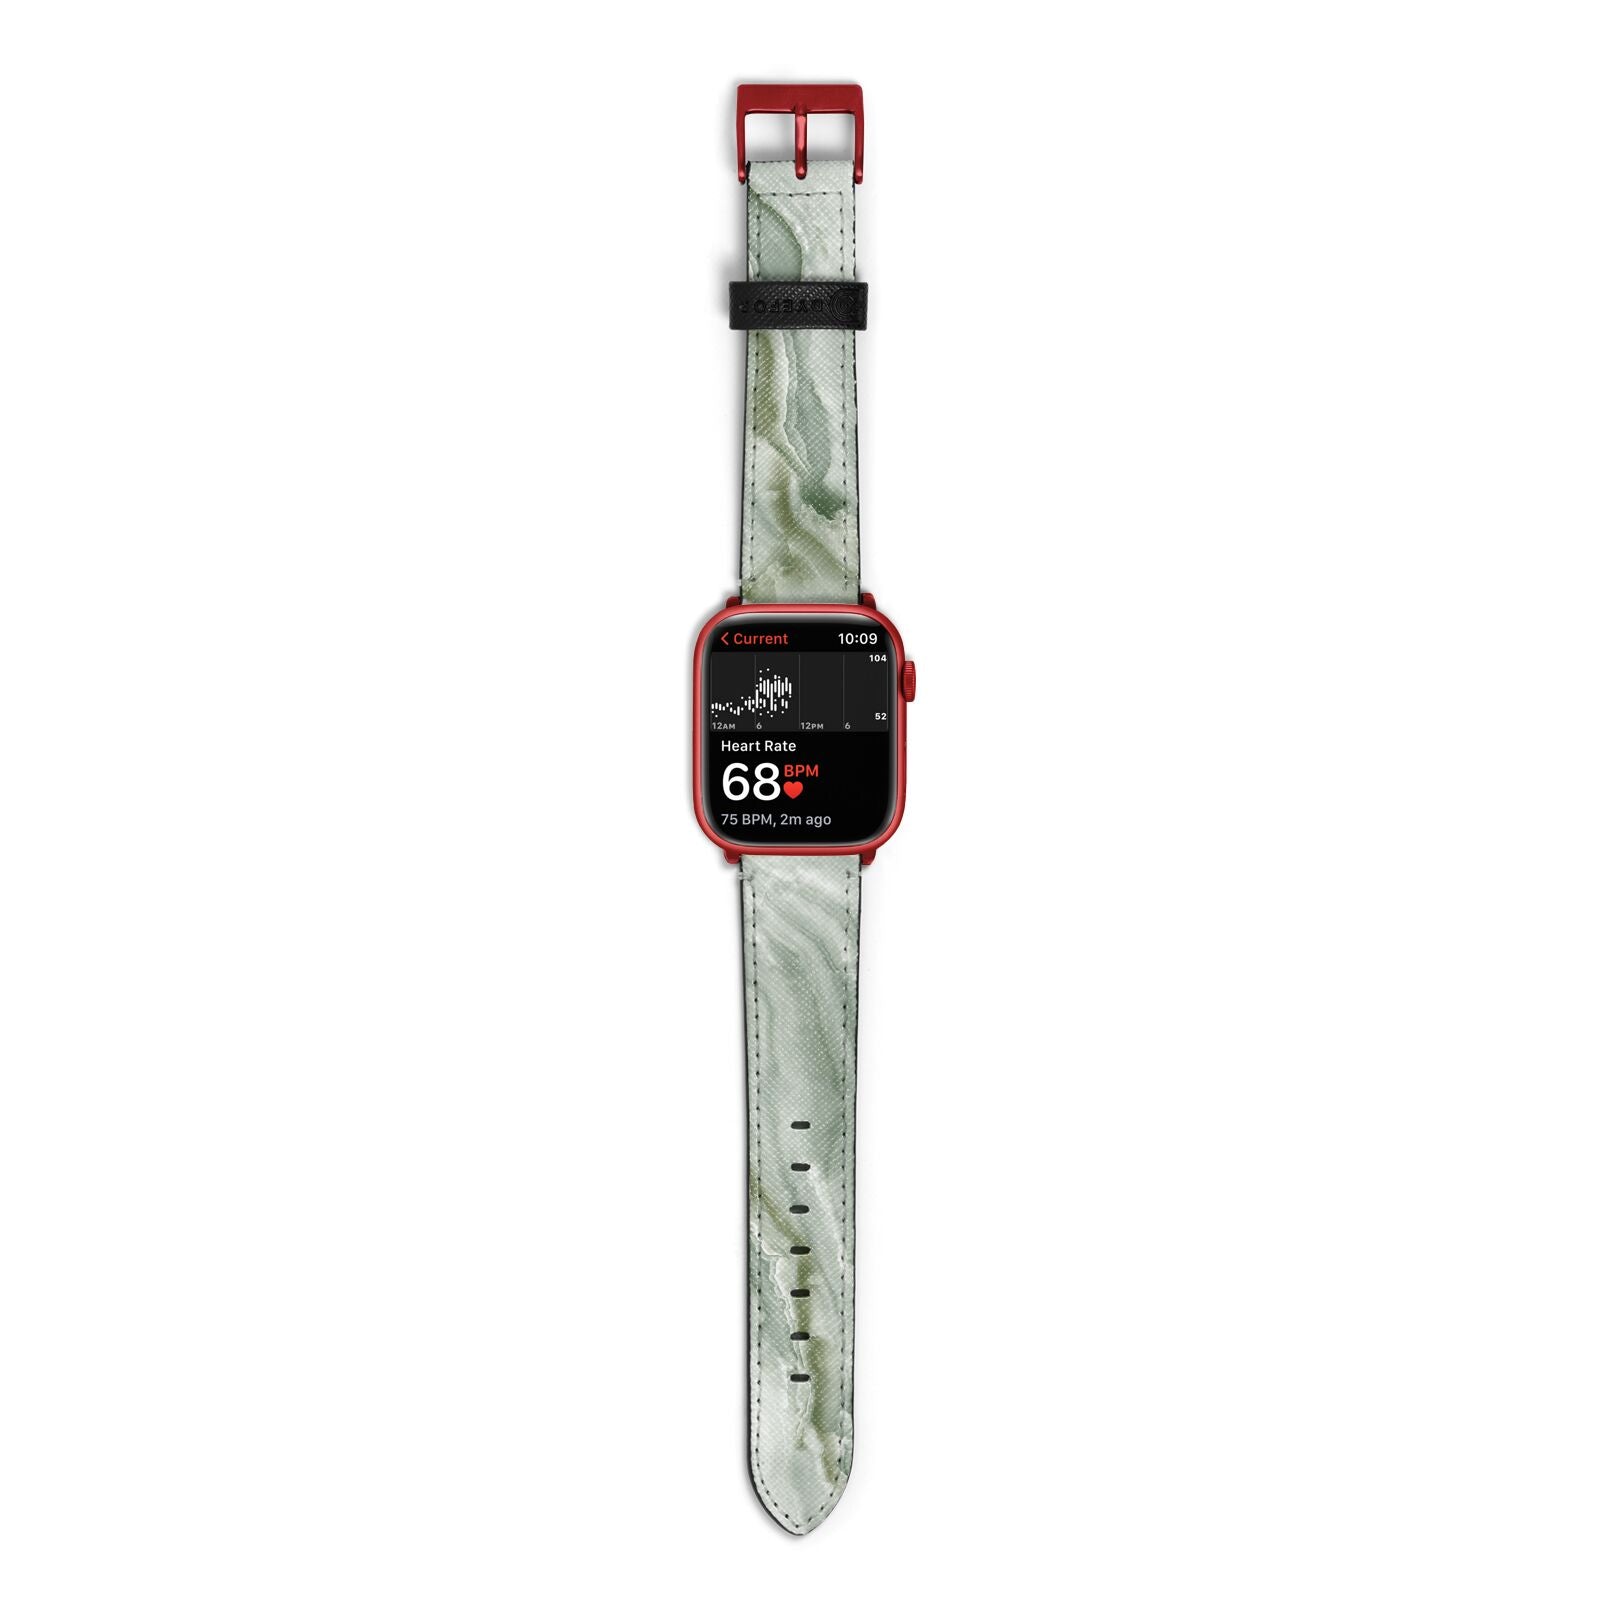 Pistachio Green Marble Apple Watch Strap Size 38mm with Red Hardware